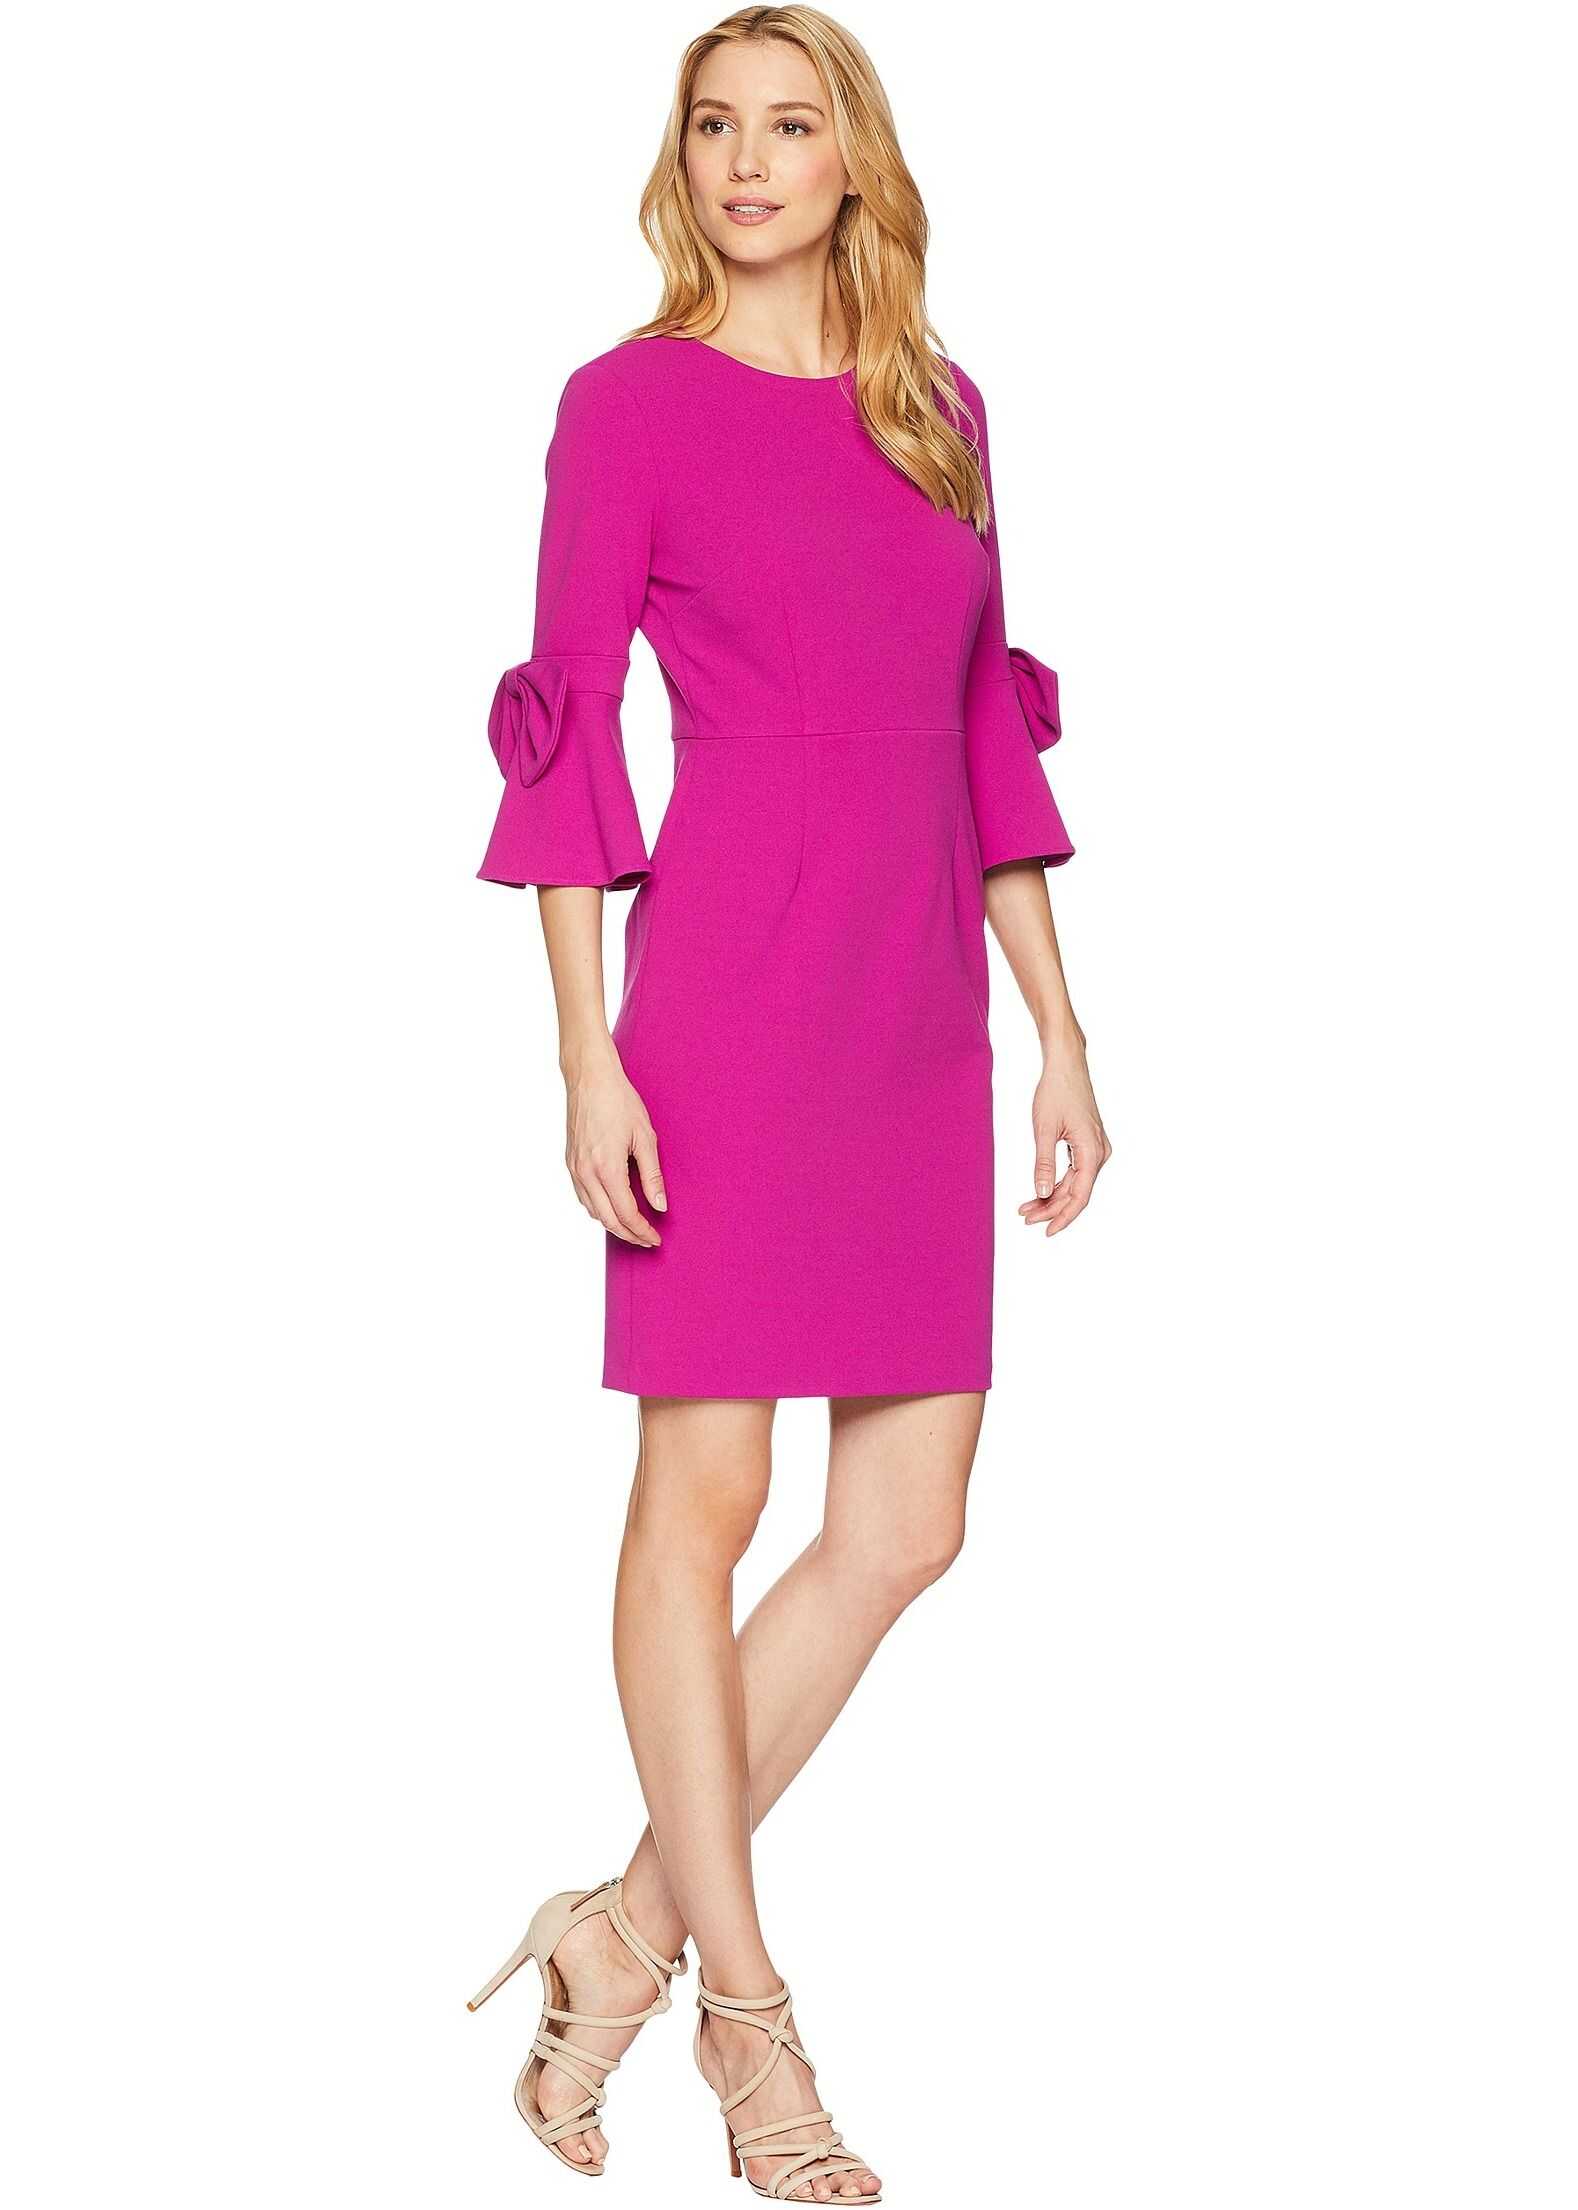 Donna Morgan 3/4 Bell Sleeve Crepe Shift Dress w/ Bow Detail at Wrist Orchid